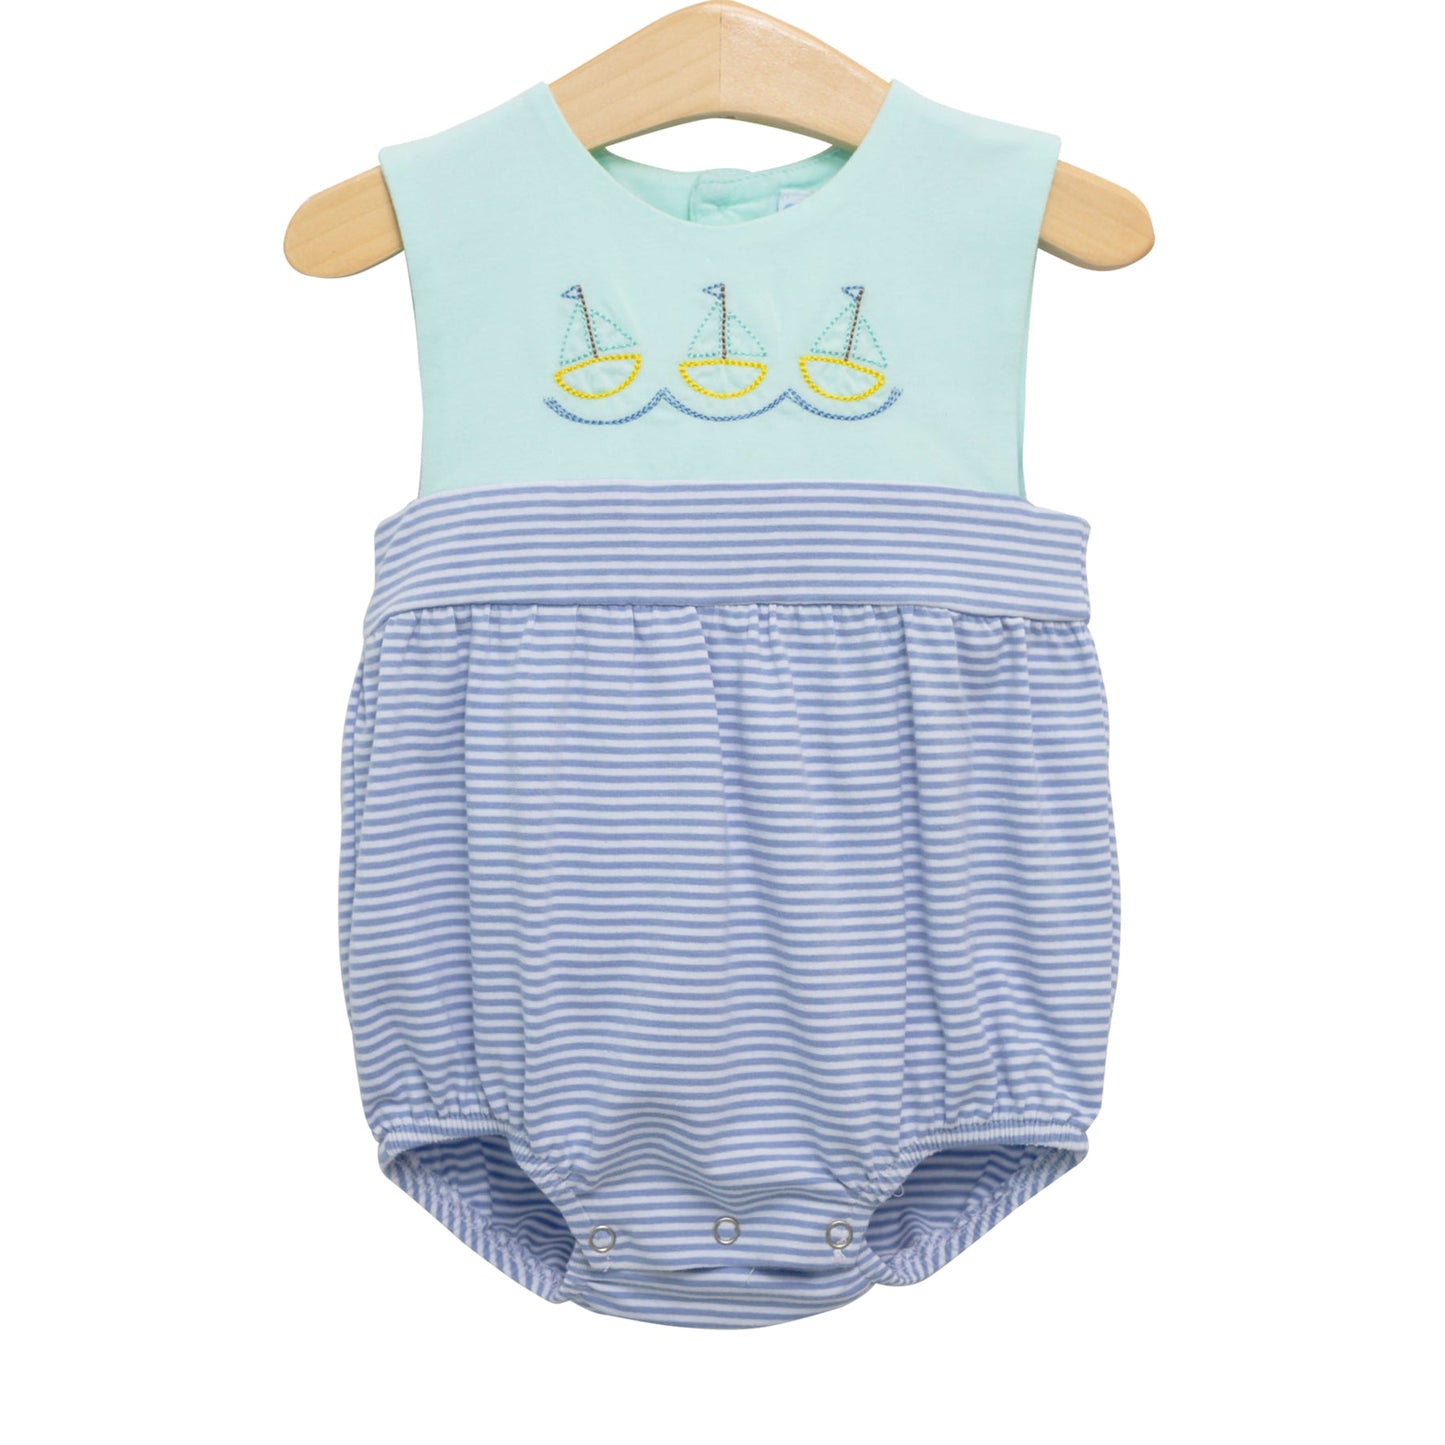 Trotter Street Sailboat Embroidery Sunsuit